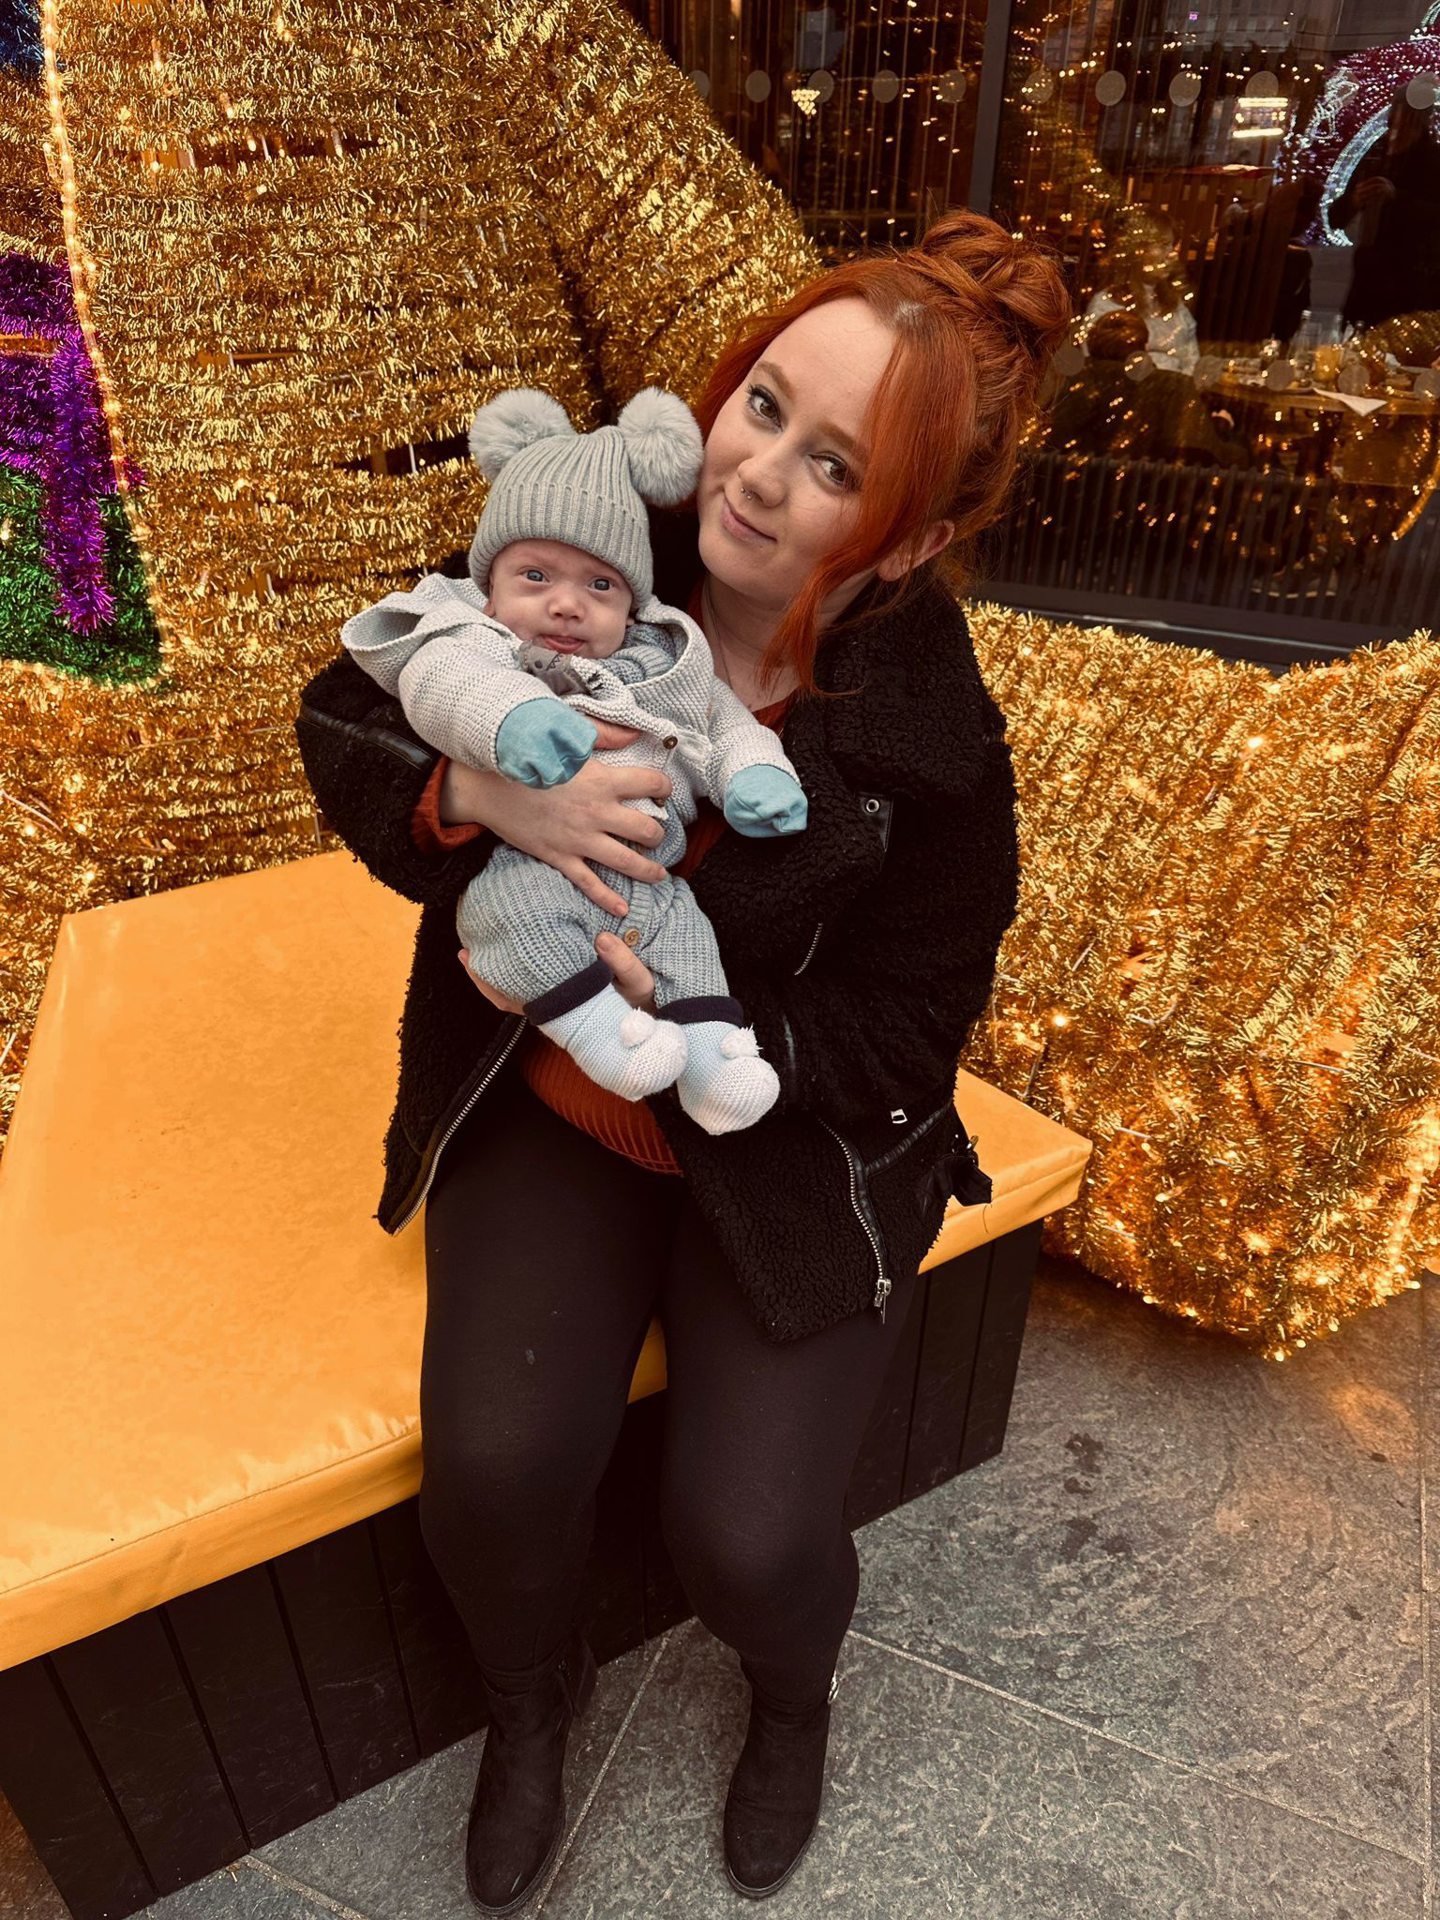 Rebecca and Logan at the Christmas market in Aberdeen.